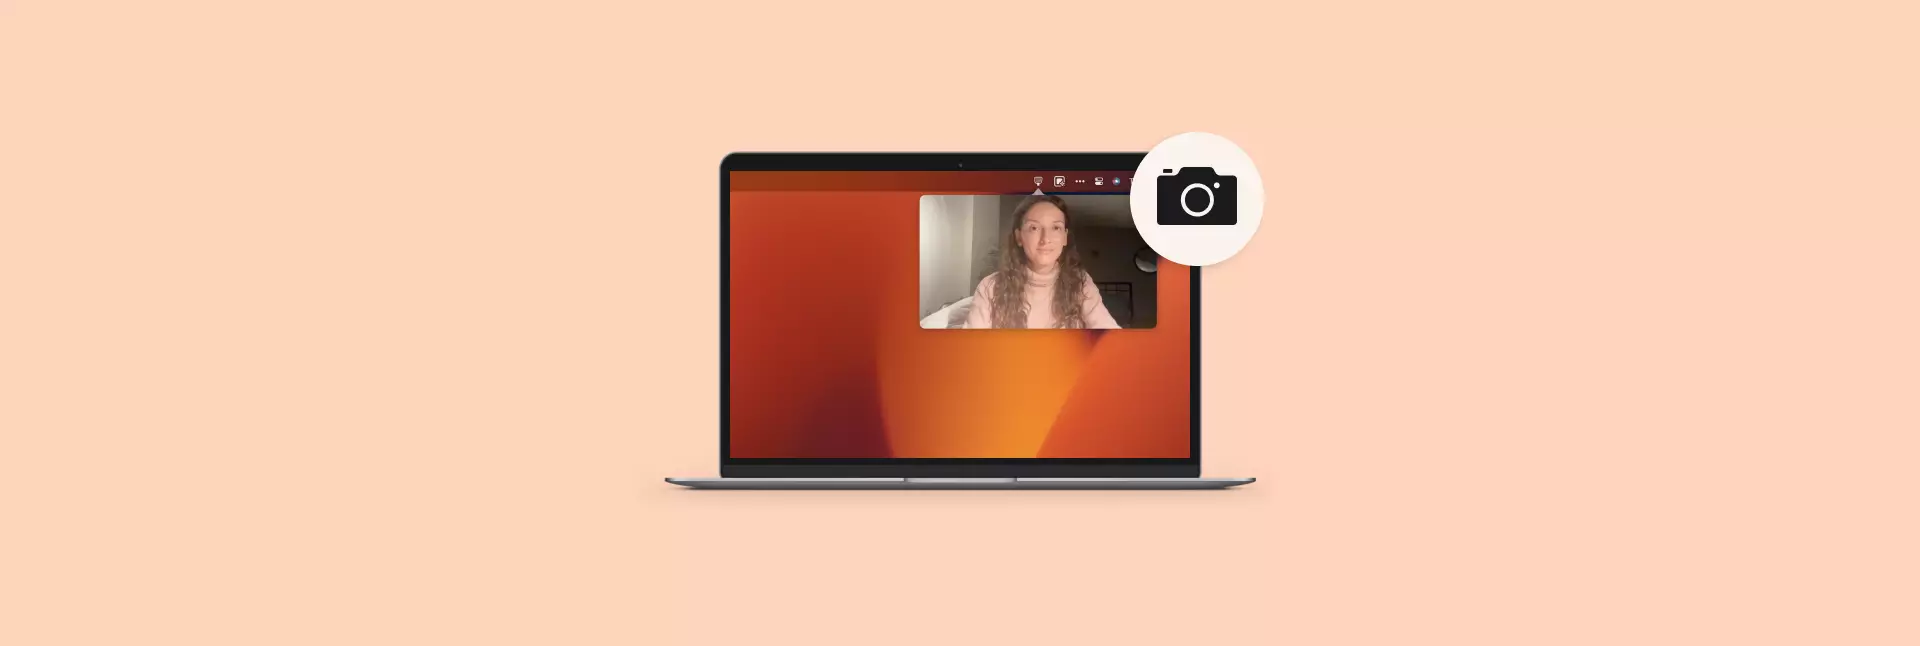 How to Turn on the Camera on Your Mac